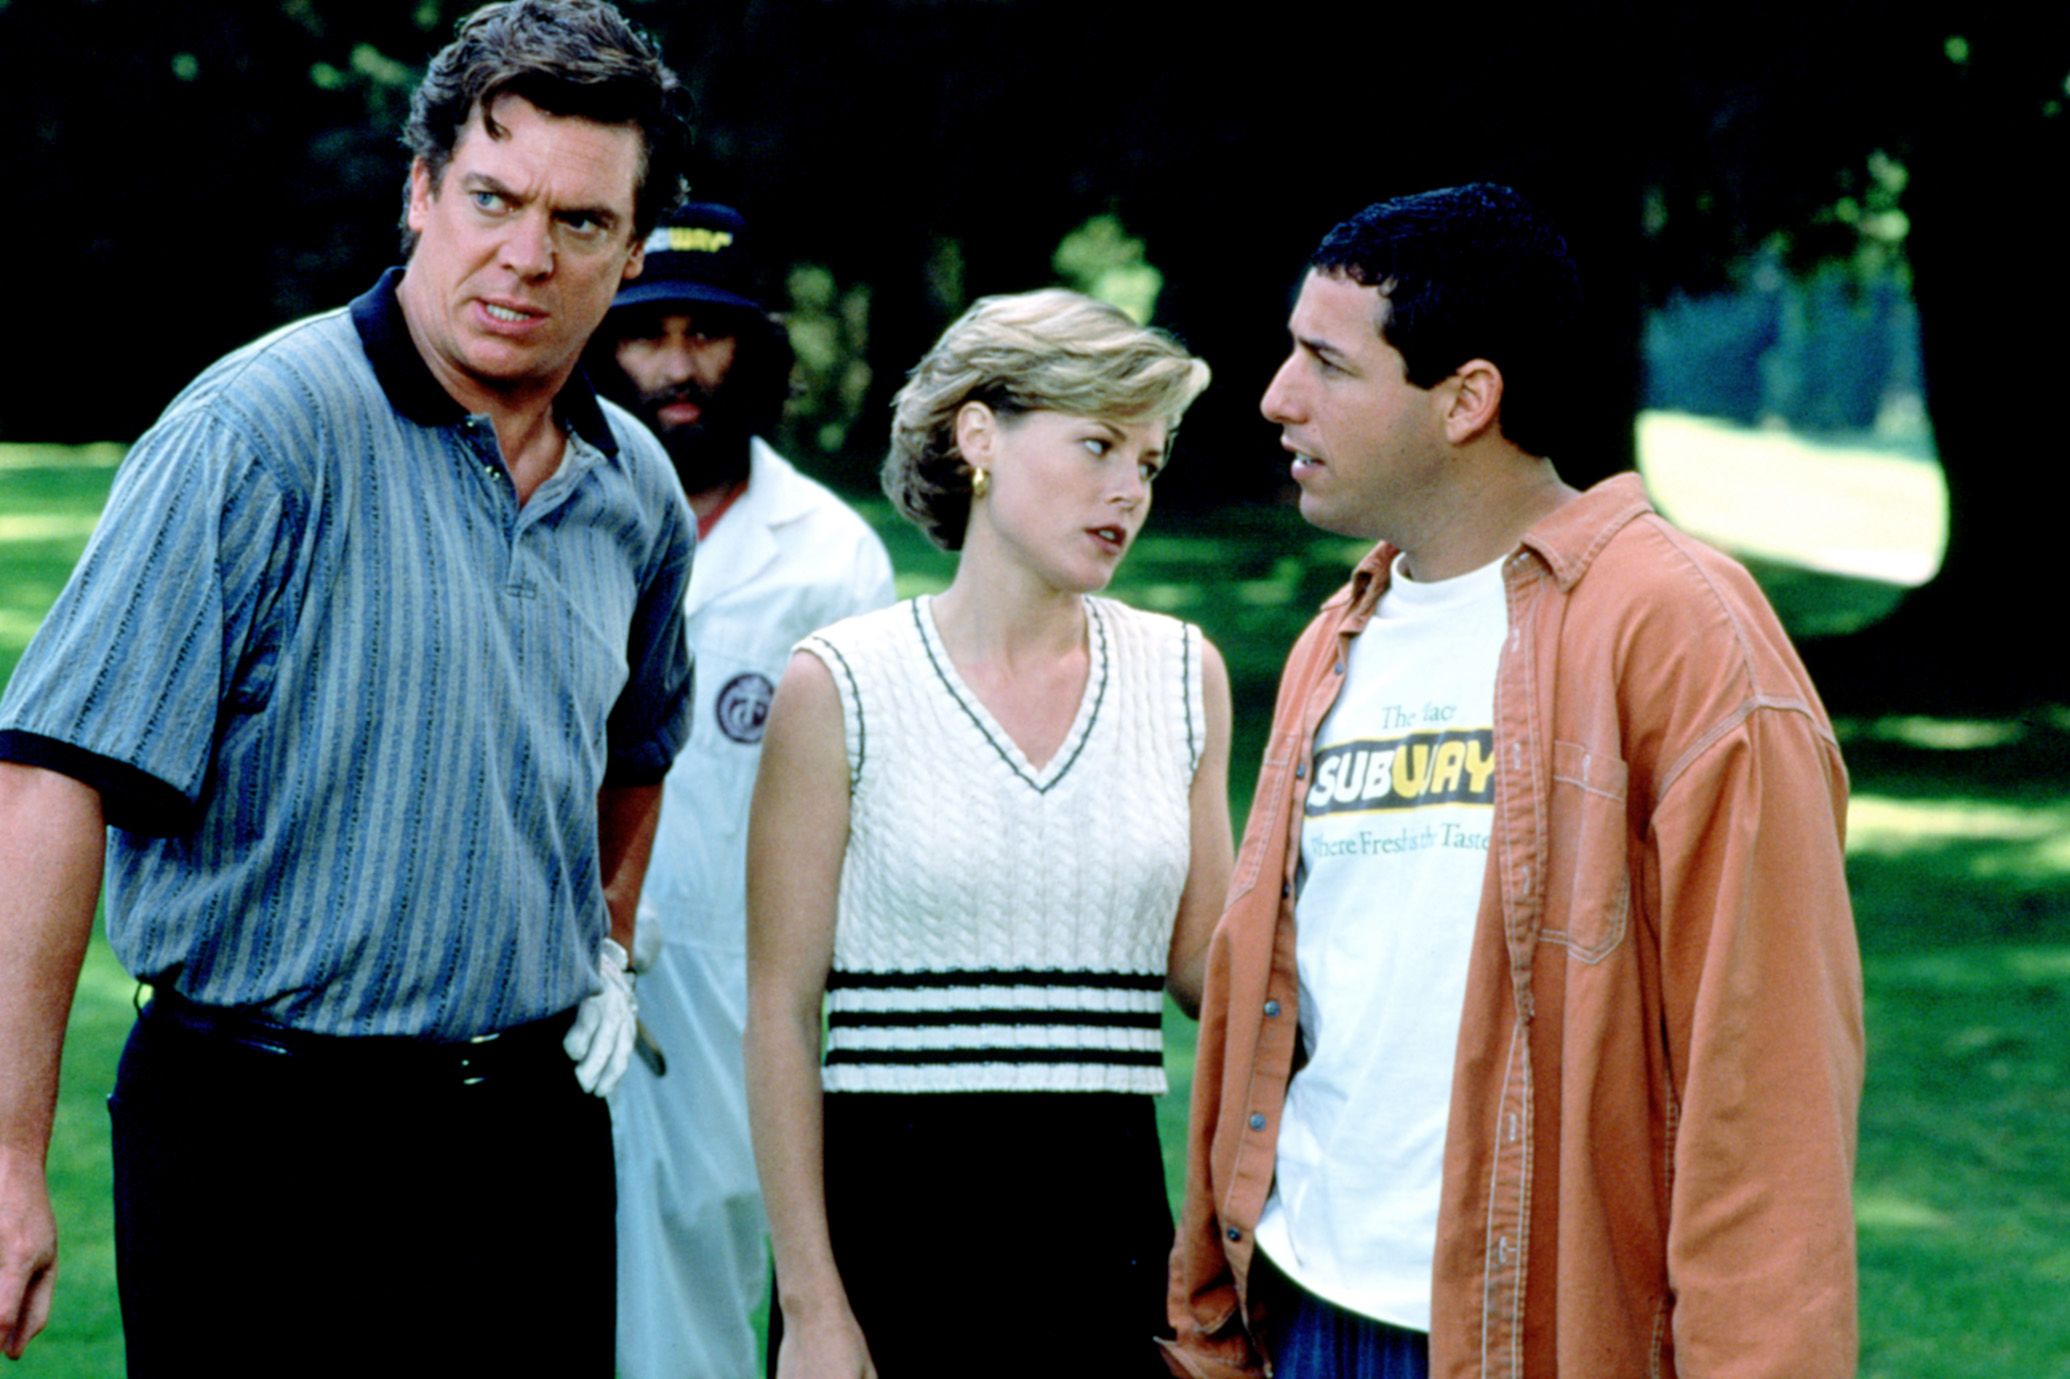 Adam Sandler is working on ‘Happy Gilmore 2,’ according to Christopher McDonald - Entertainment - News